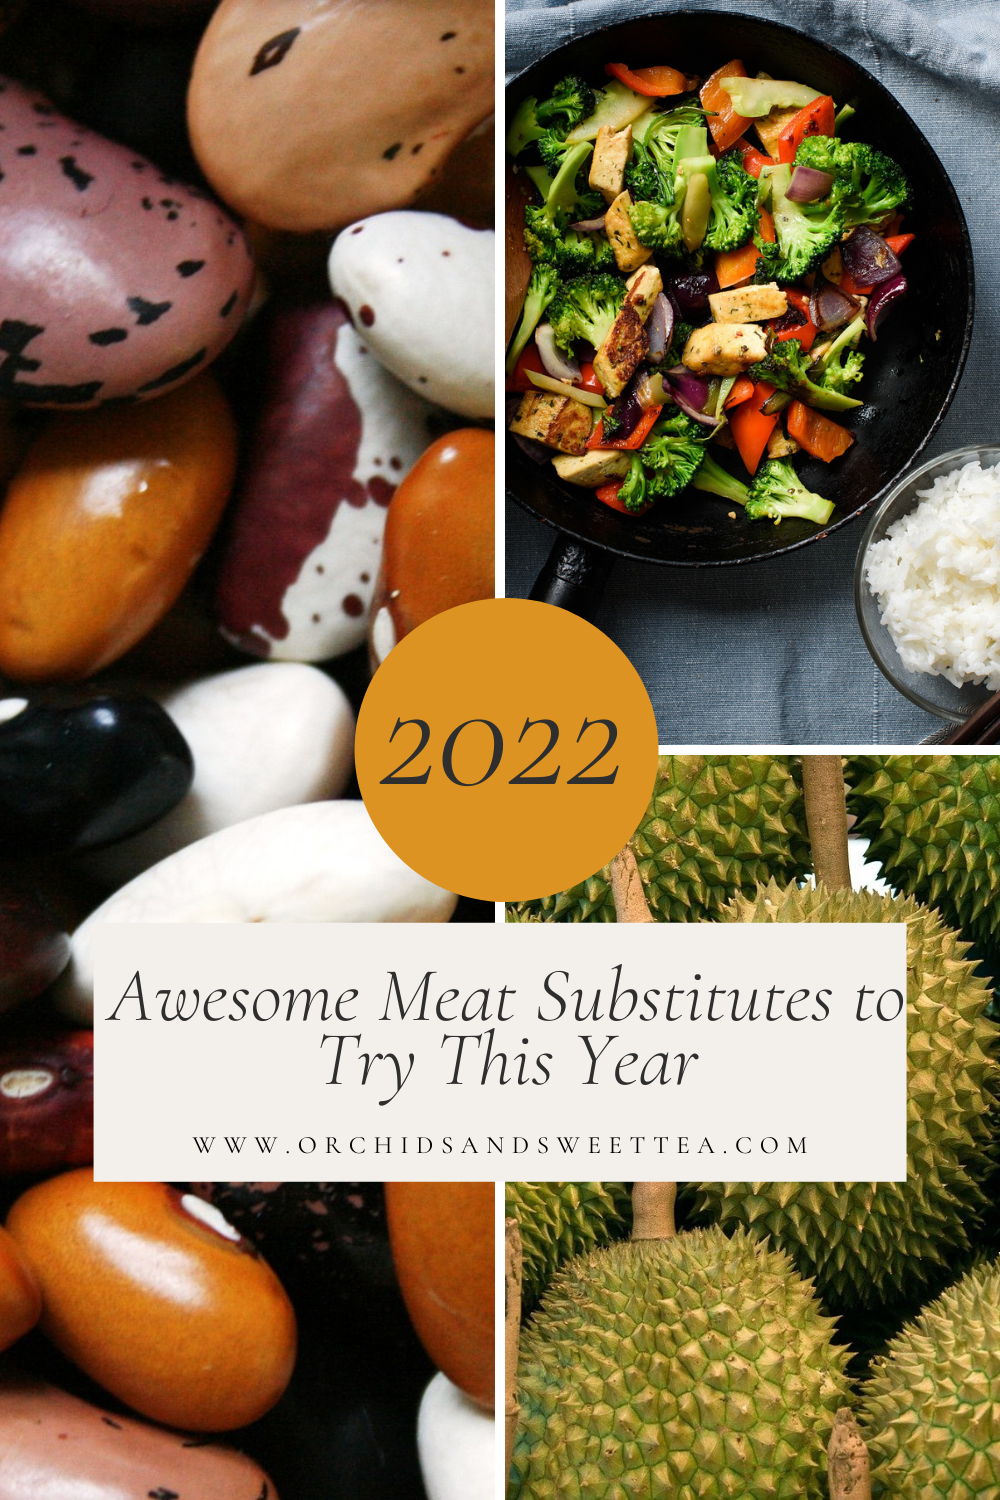 Collage with text: 2022 Awesome Meat Substitutes to Try This Year